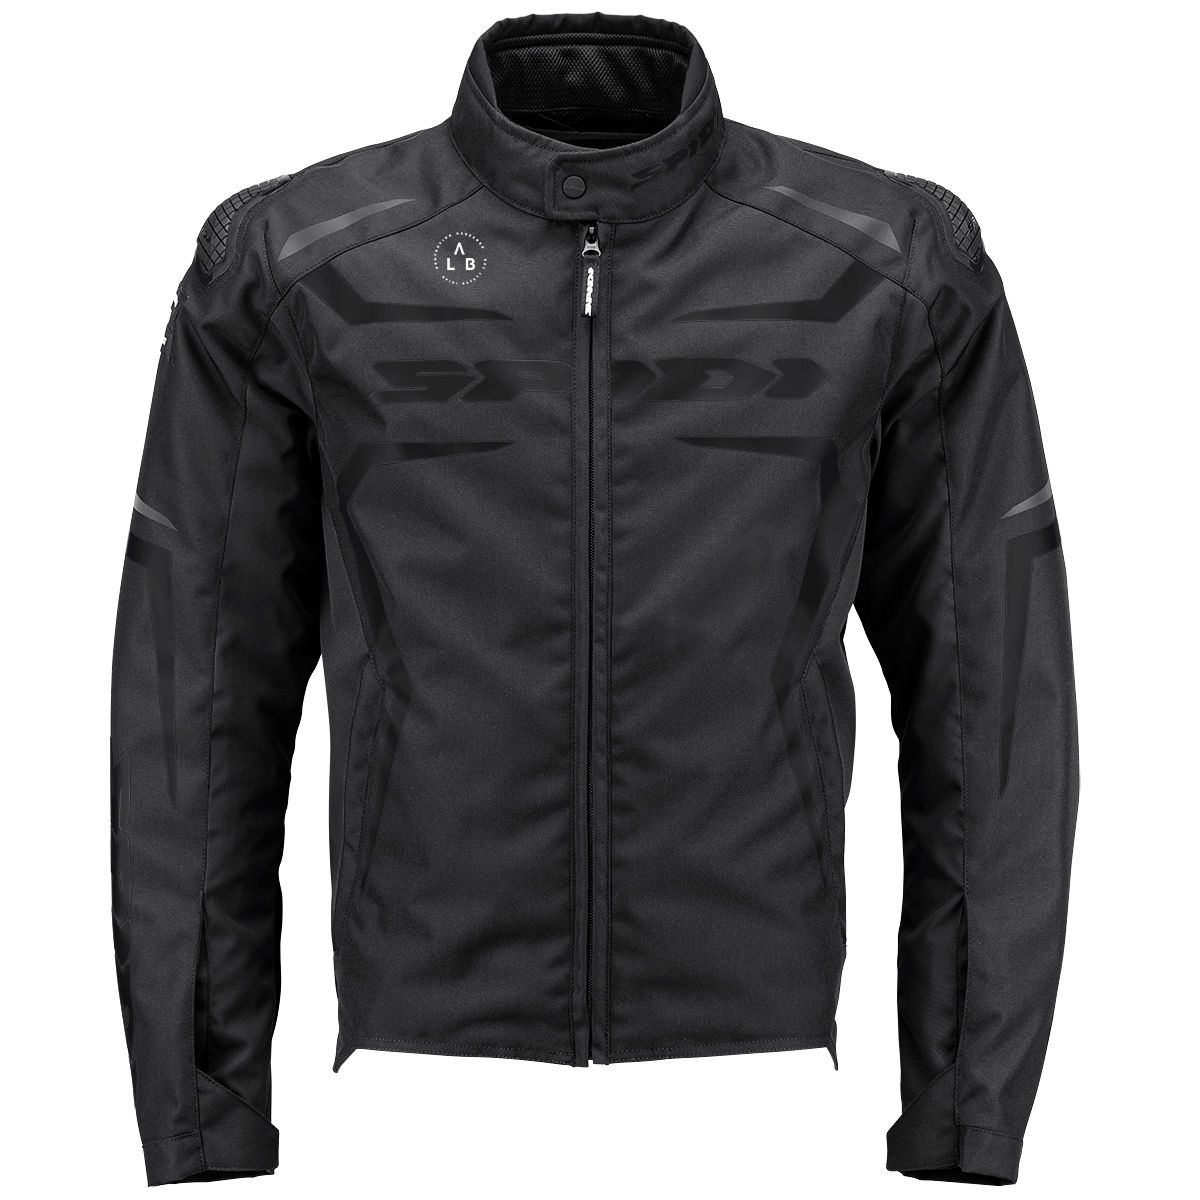 Image of Spidi Race-Evo H2Out Jacket Black Size M ID 8030161460360